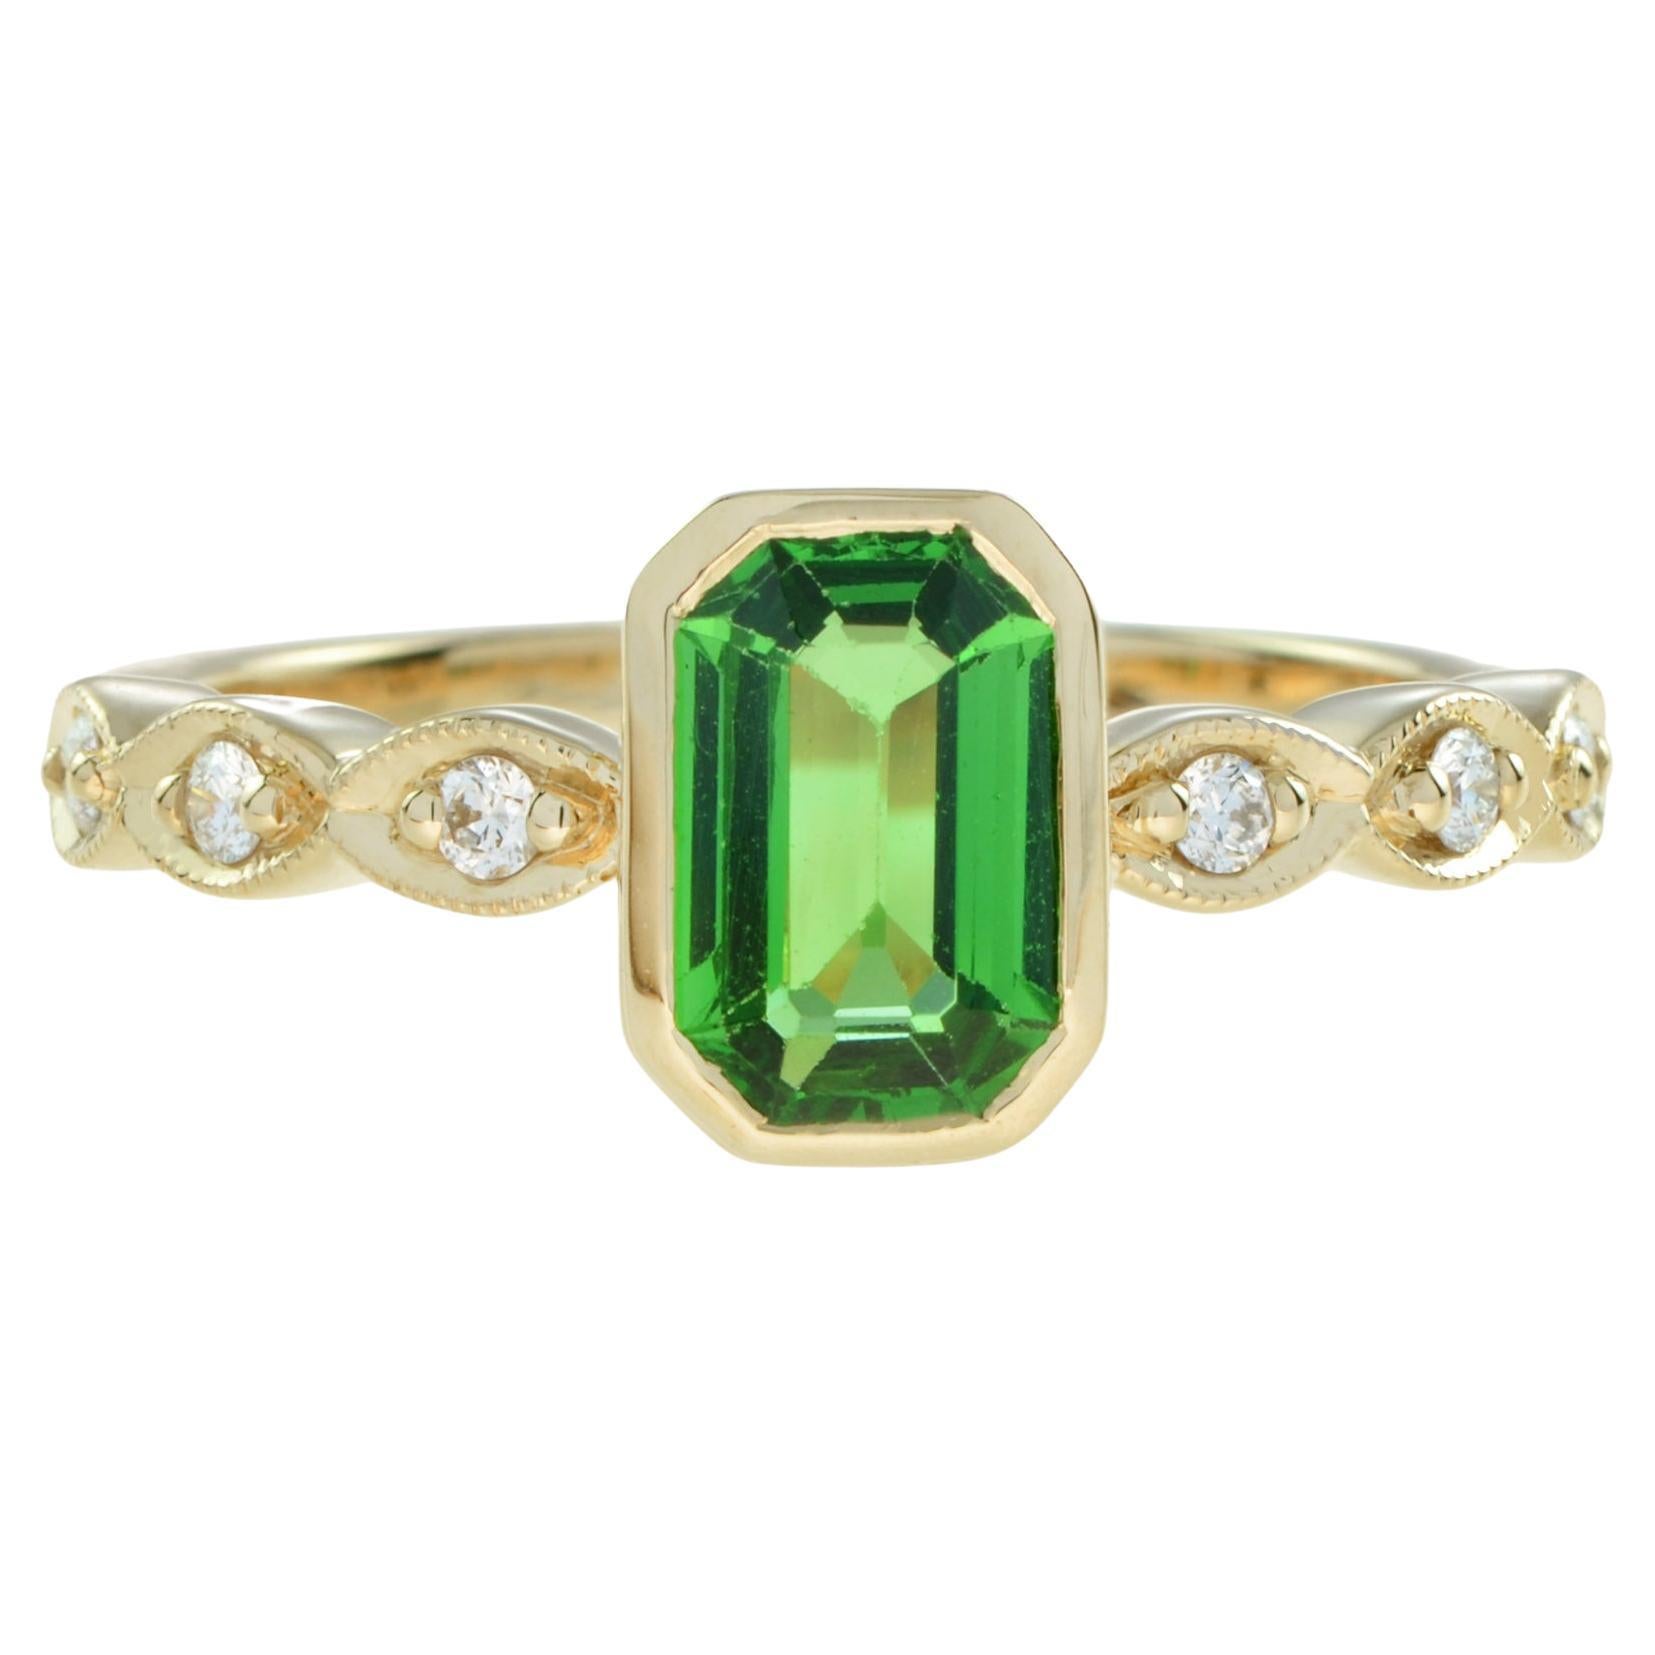 Certified Emerald Cut Tsavorite and Diamond Engagement Ring in 18K Yellow Gold For Sale